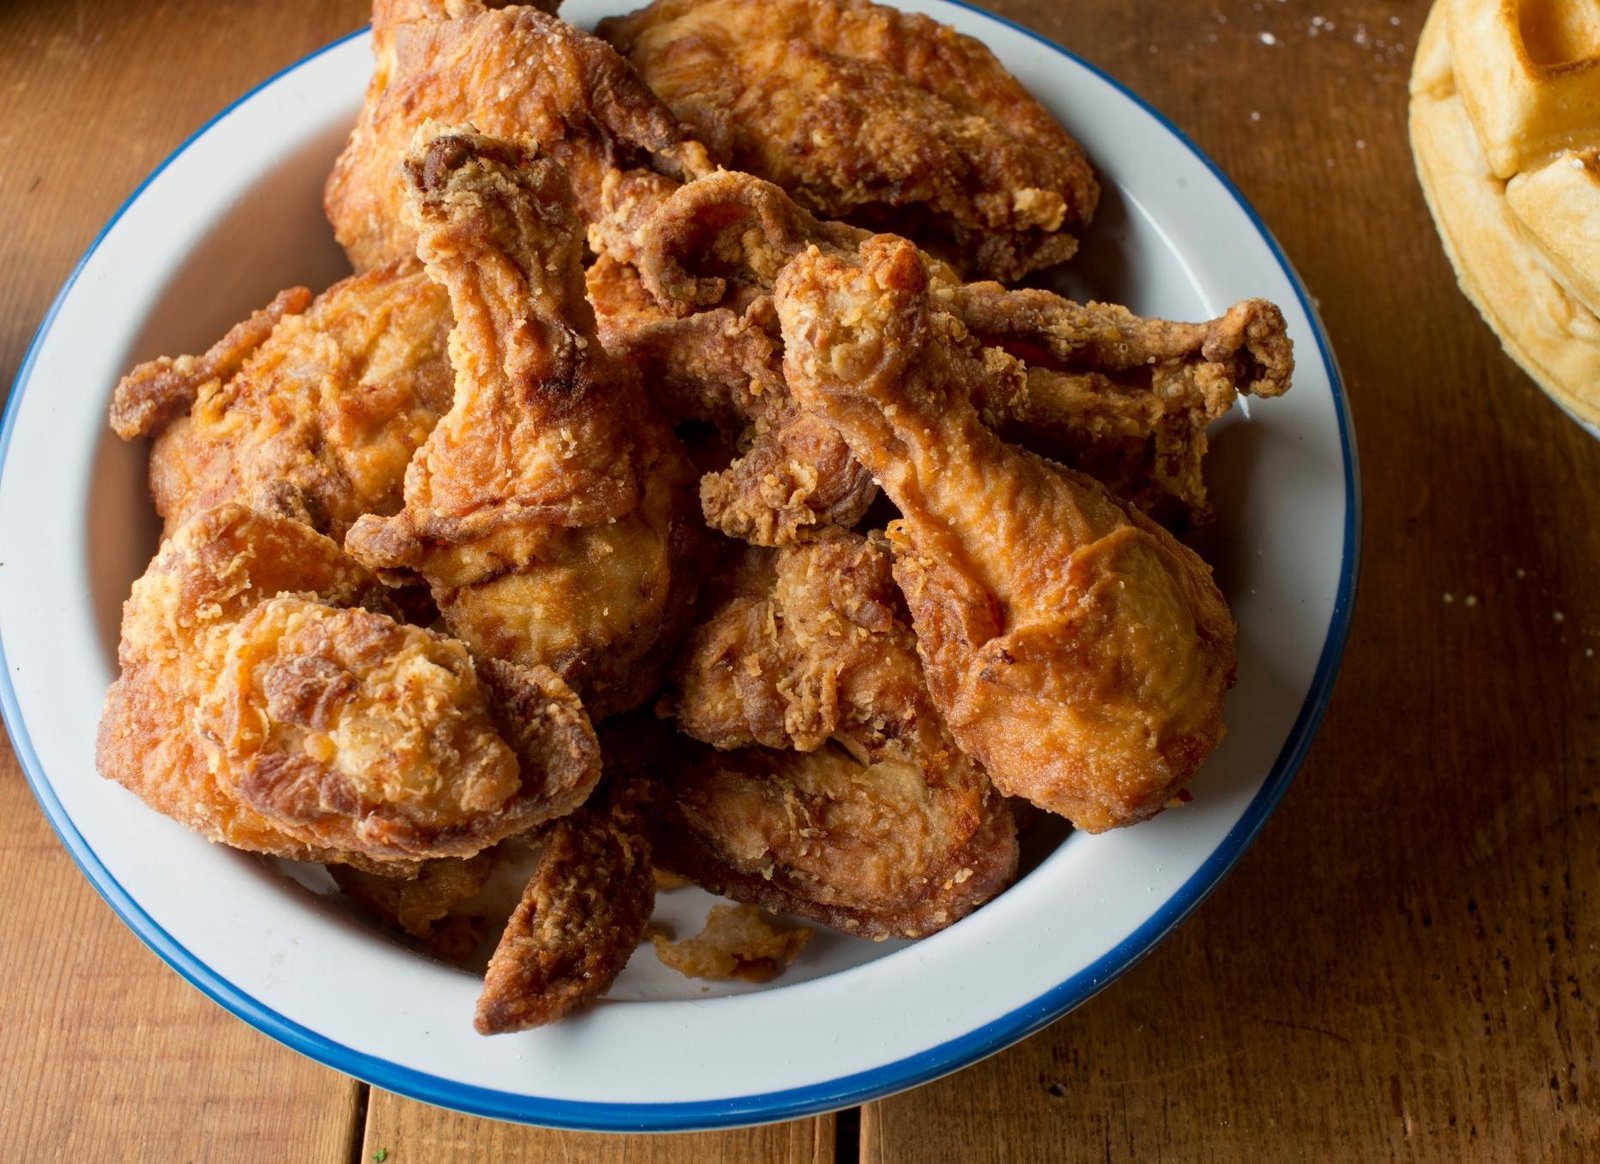 Crispy and Delicious: Our Foolproof Recipe for the Perfect Fried Chicken